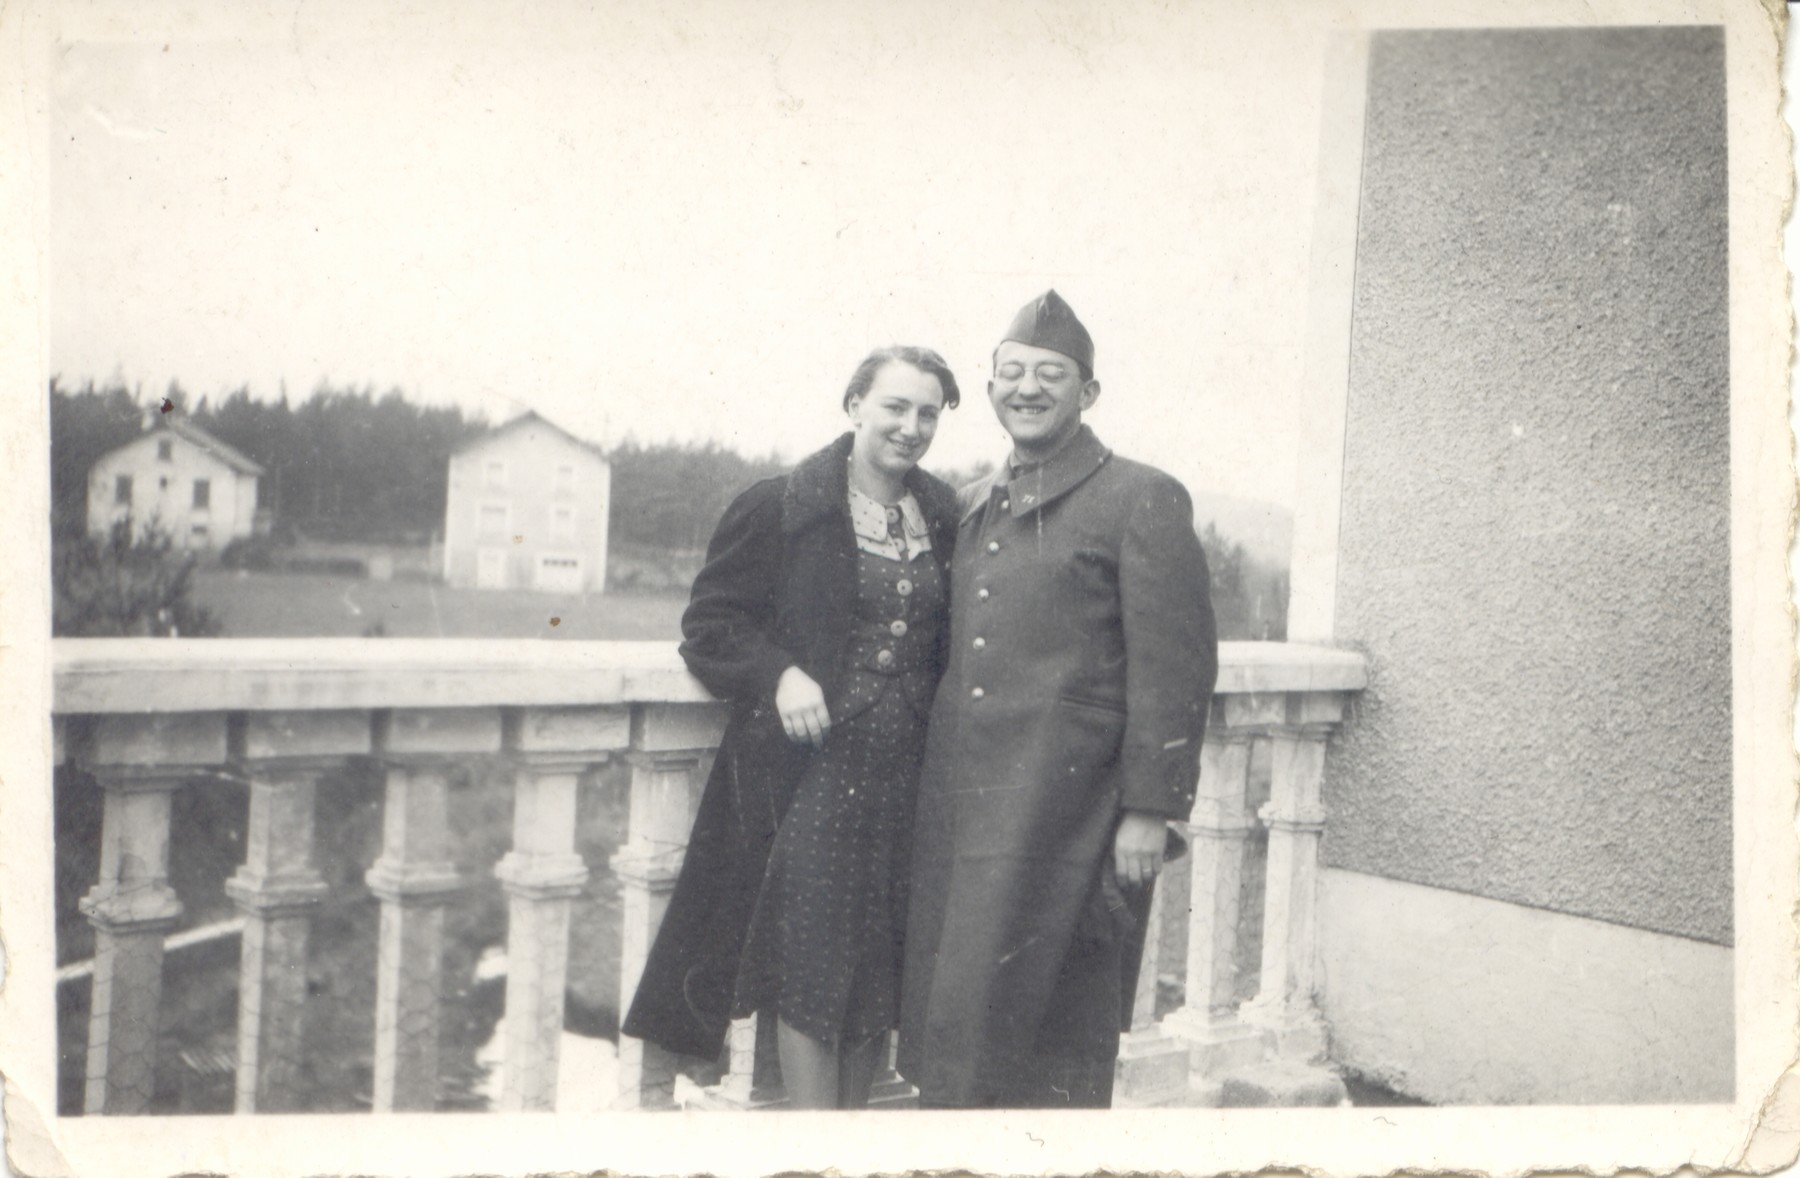 Rene and Germaine Brunschwig pose together on the balcony of a building in Le Chambon-sur-Lignon.